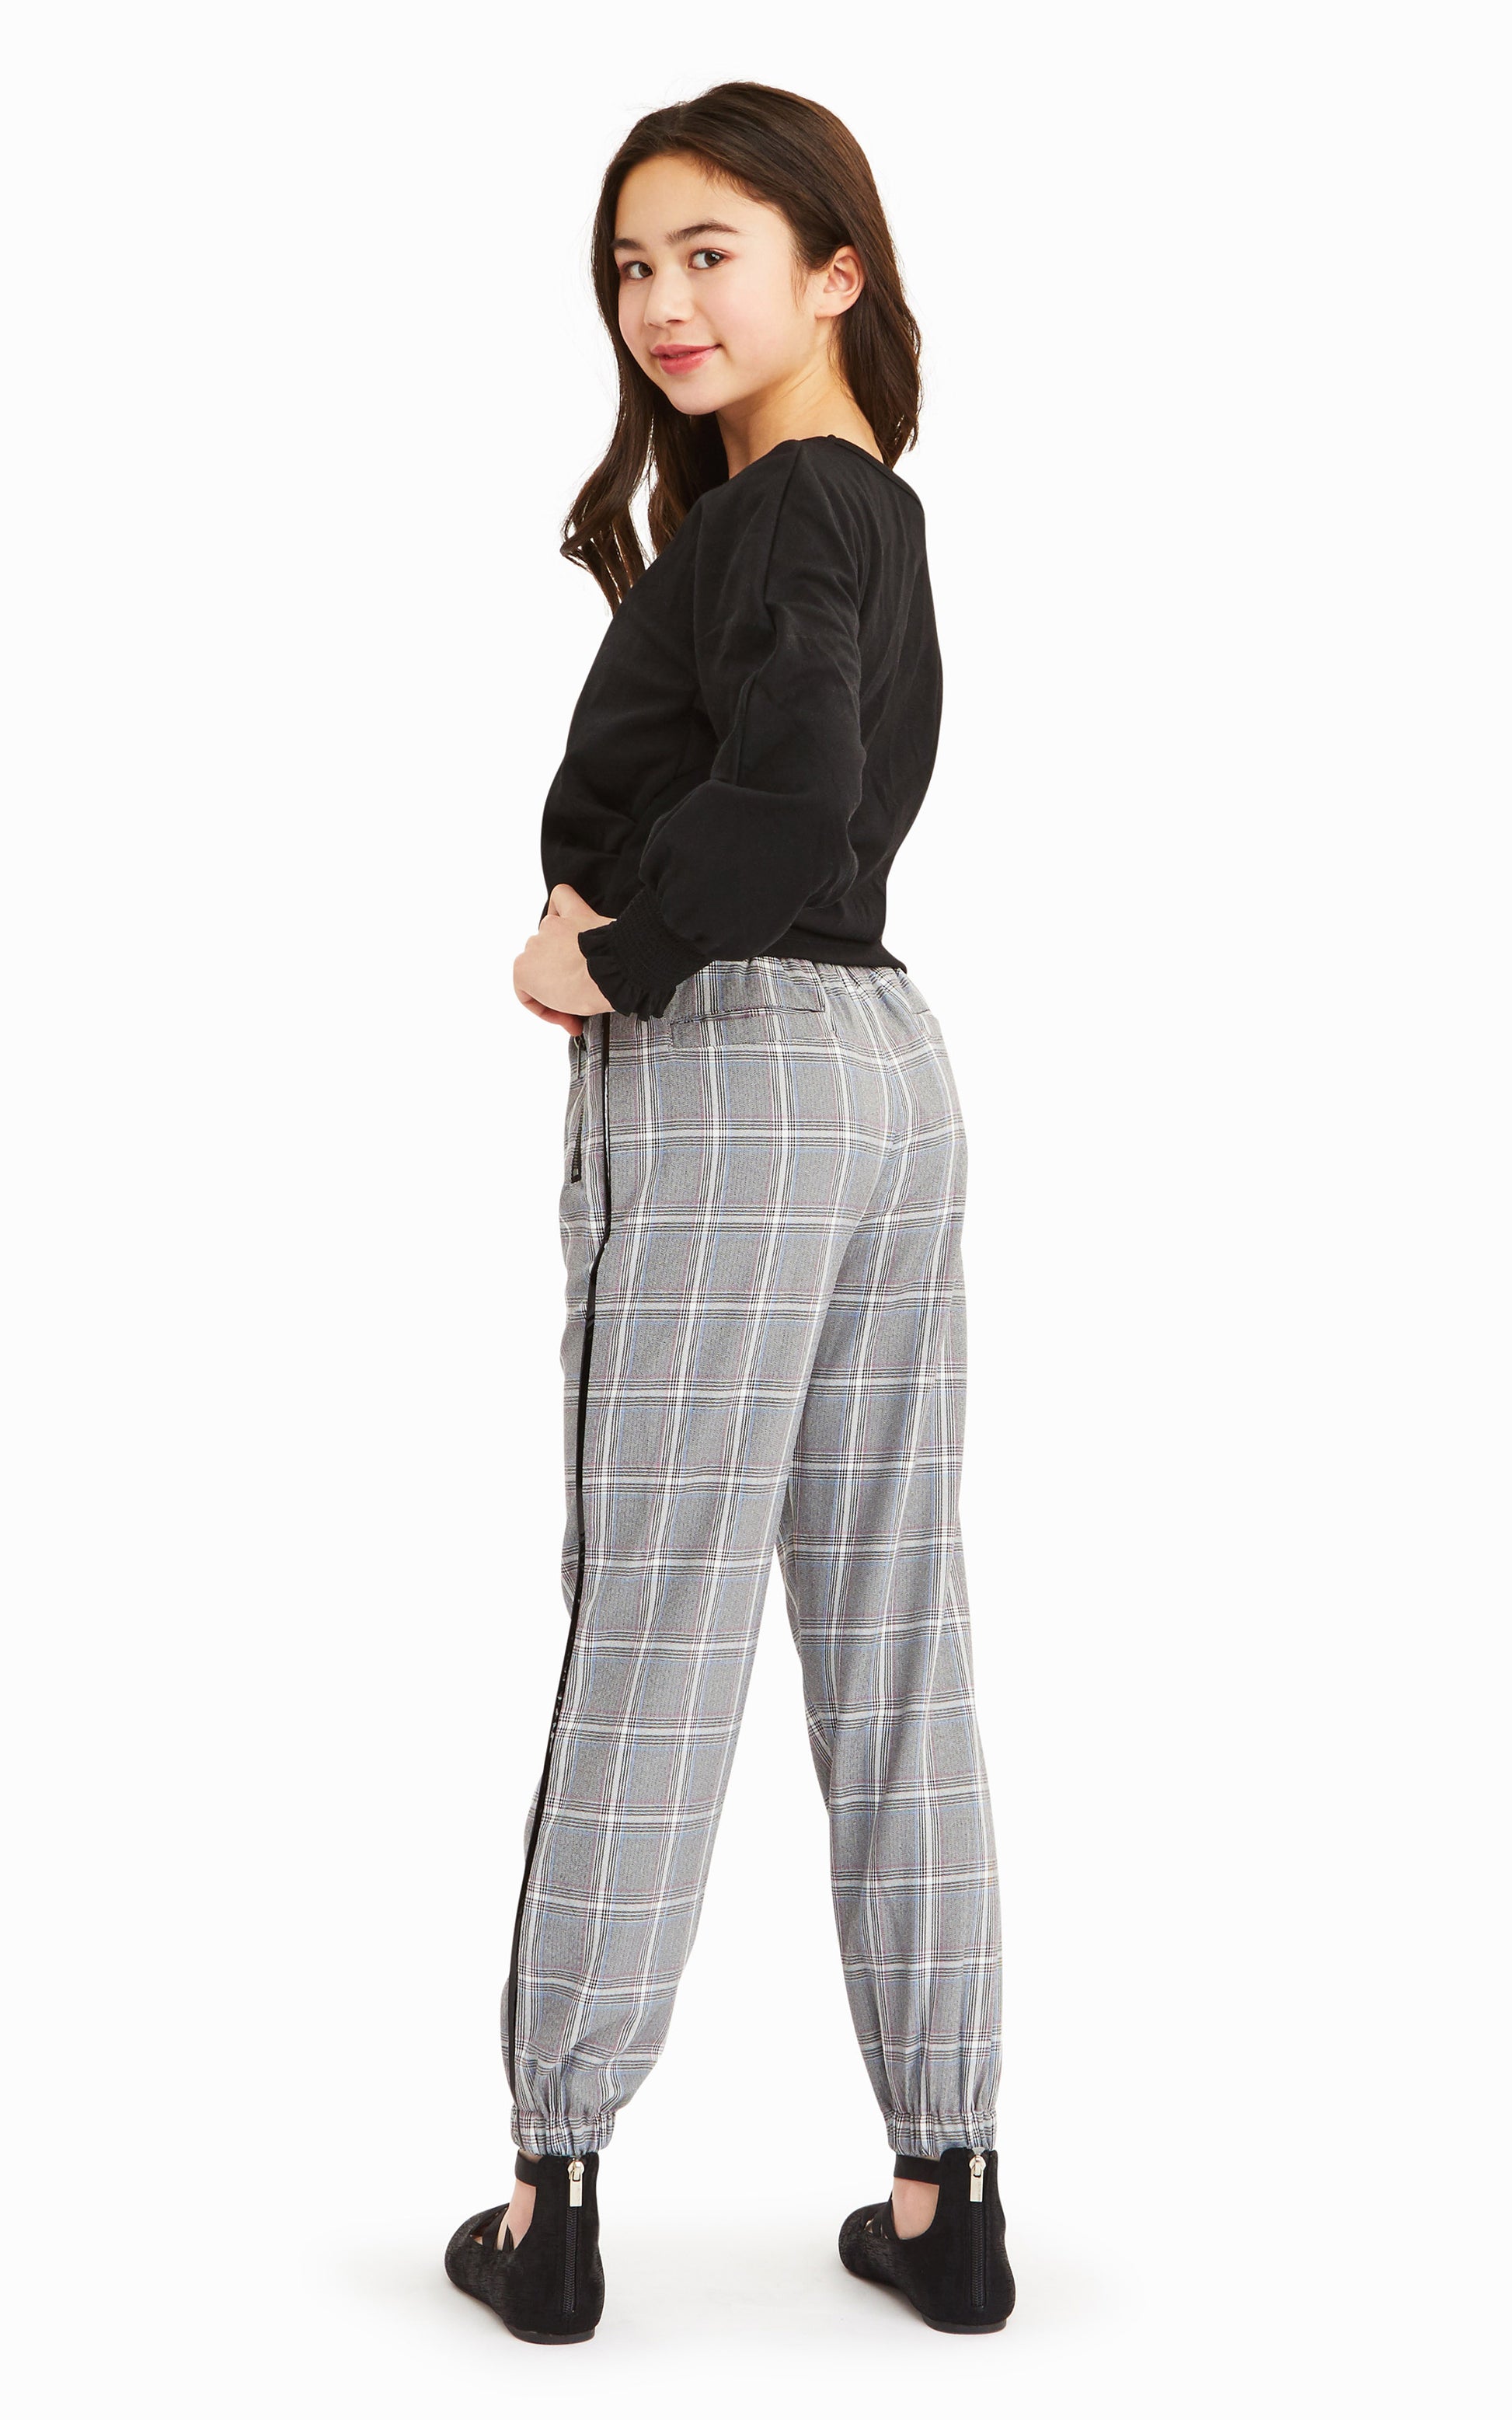 Back view of girl wearing long-sleeve black top with gray, white and black check pattern joggers.